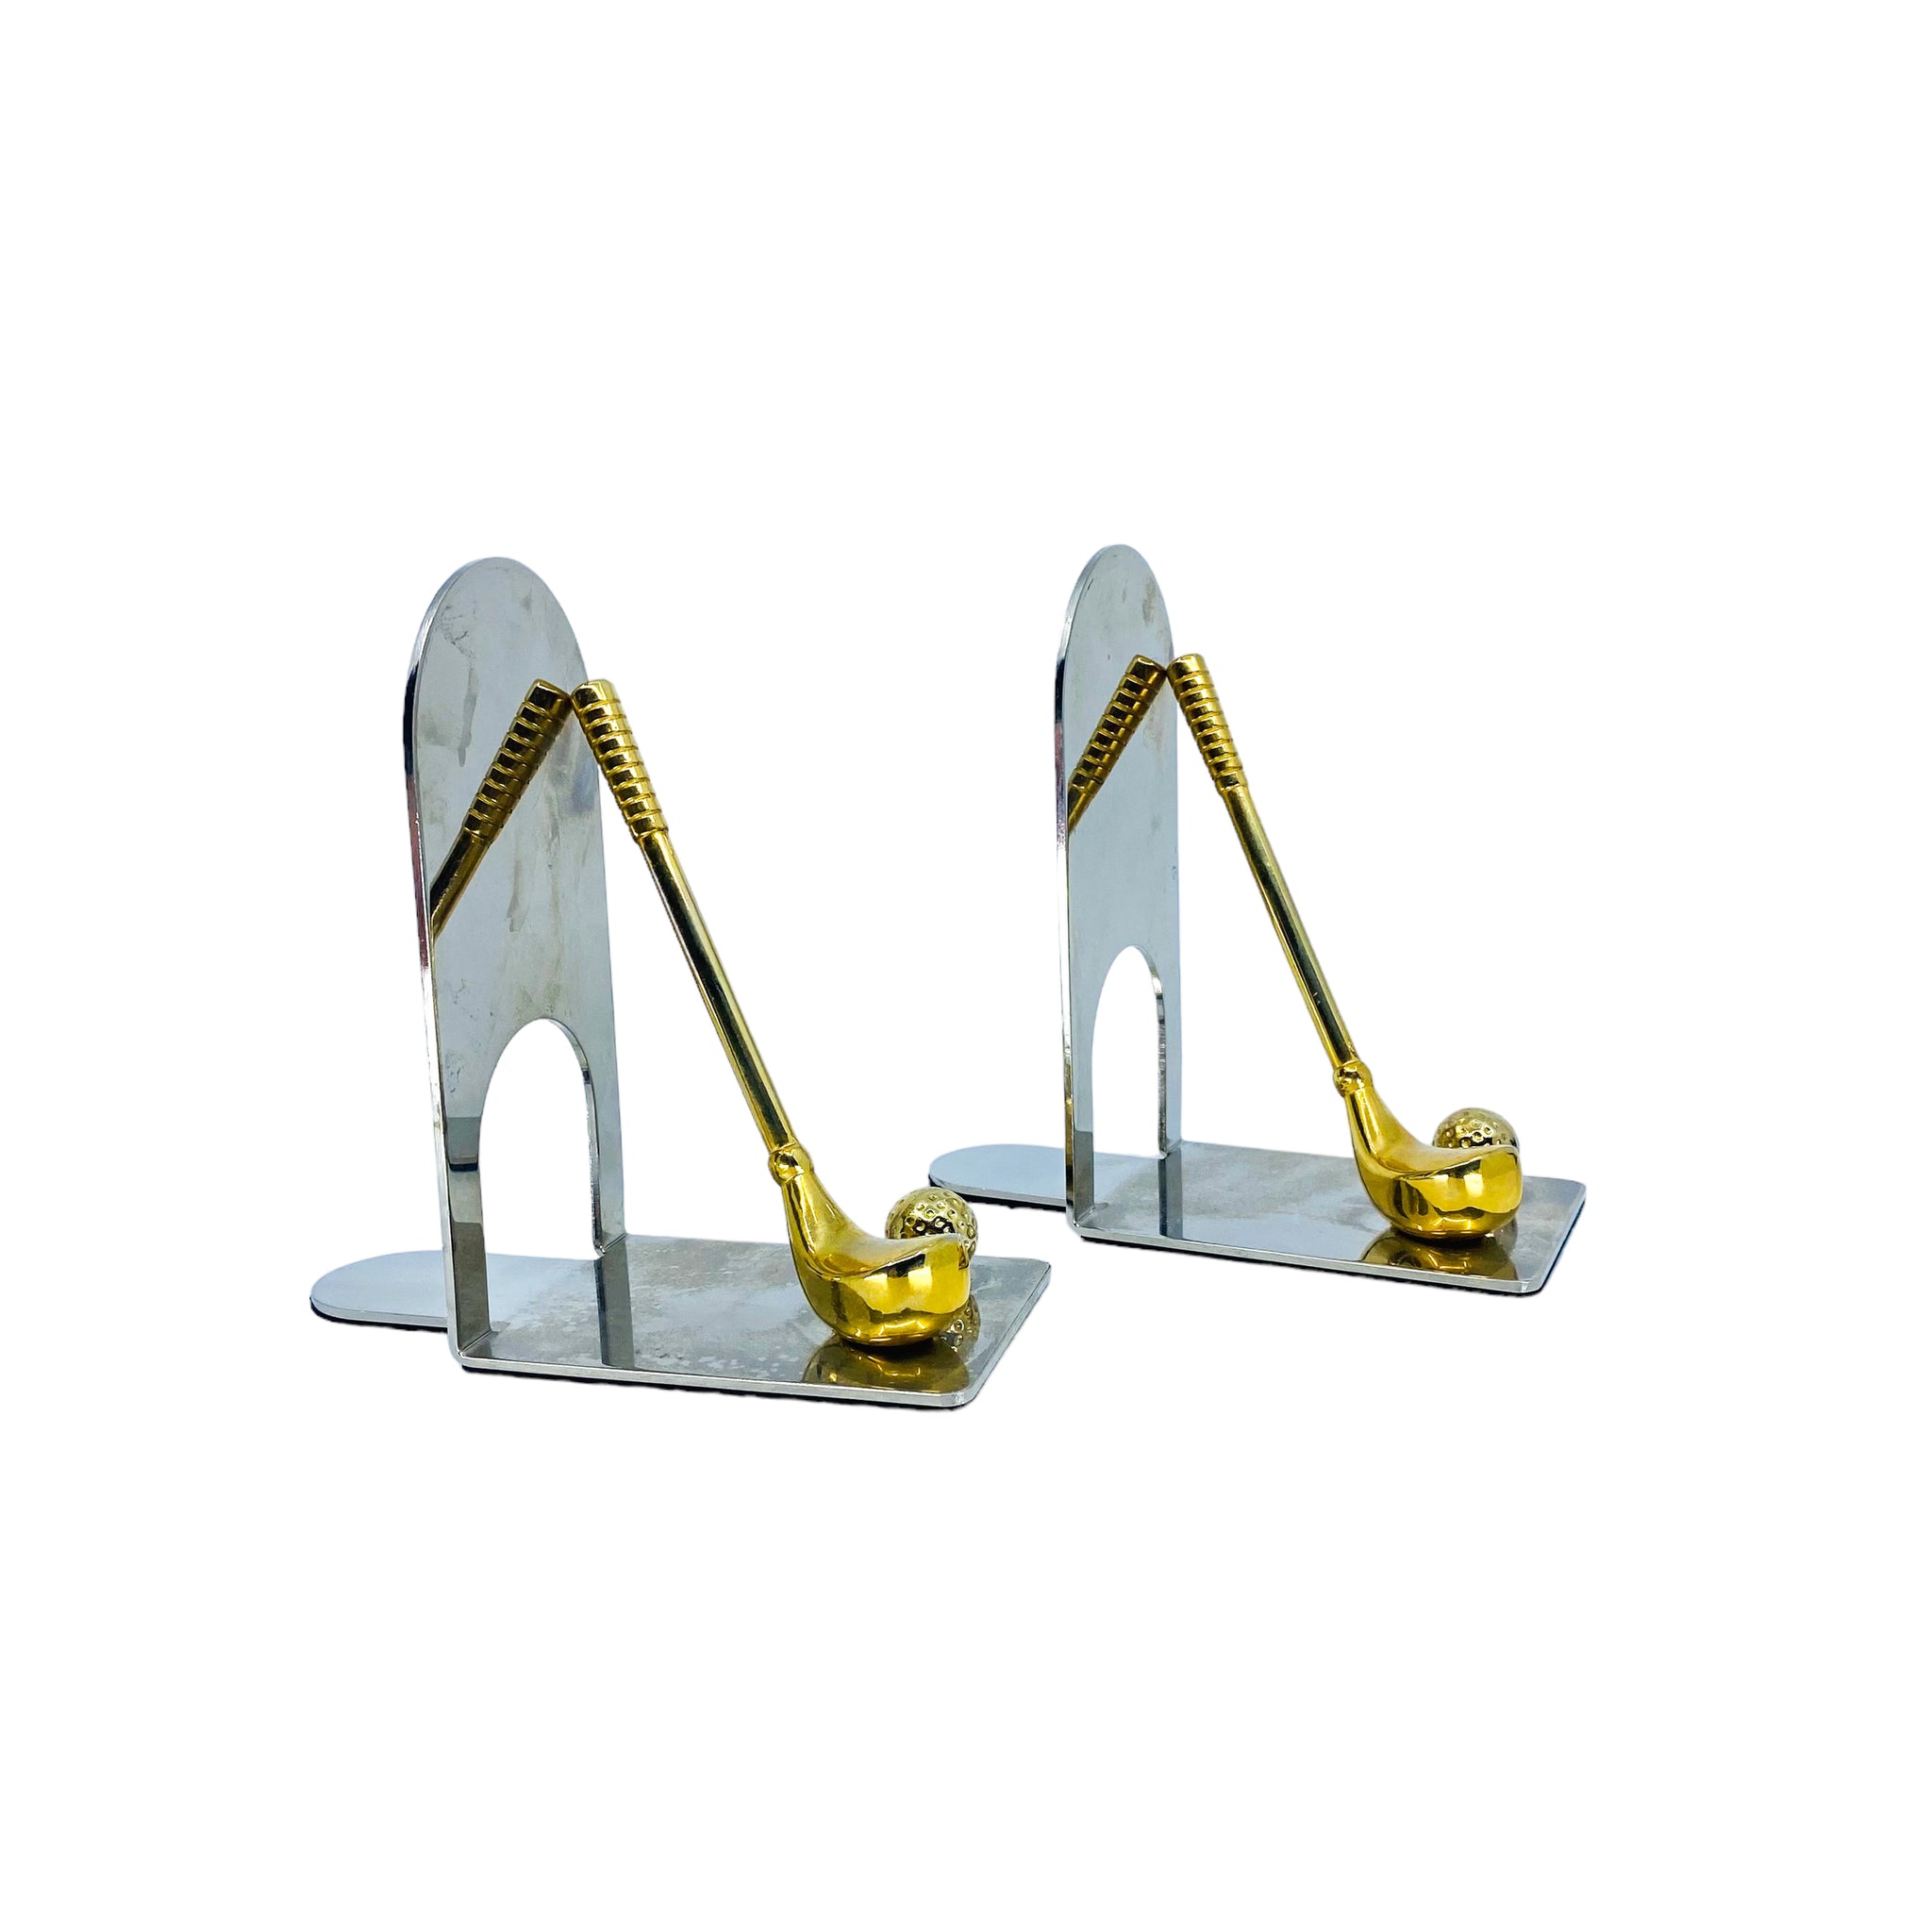 Vintage Chrome and Brass Golf Bookends